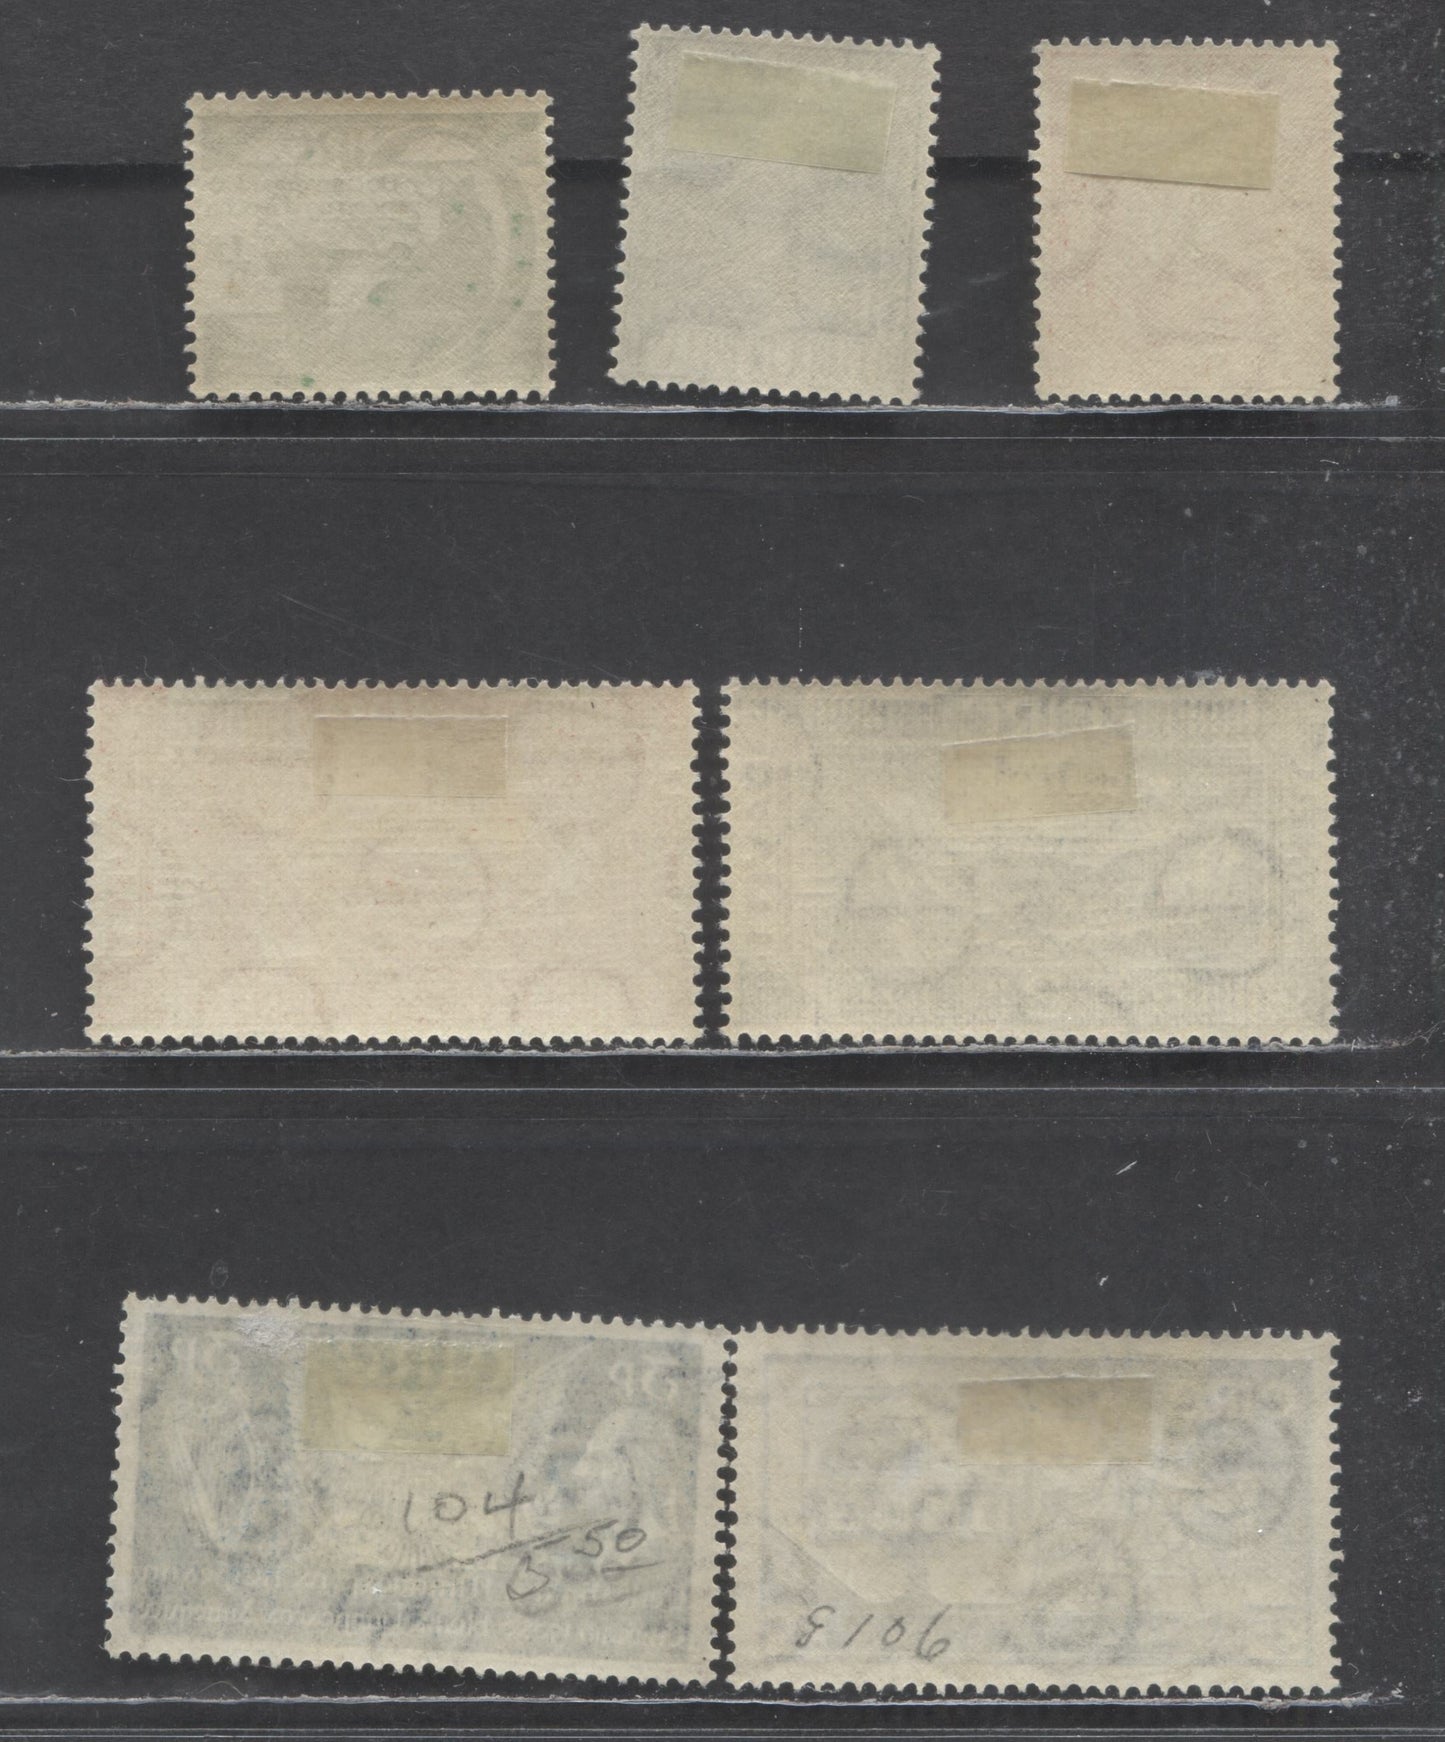 Lot 9 Ireland SC#100/141 1938-1950 Commermoratives, 7 F/VFOG Singles, Click on Listing to See ALL Pictures, Estimated Value $20